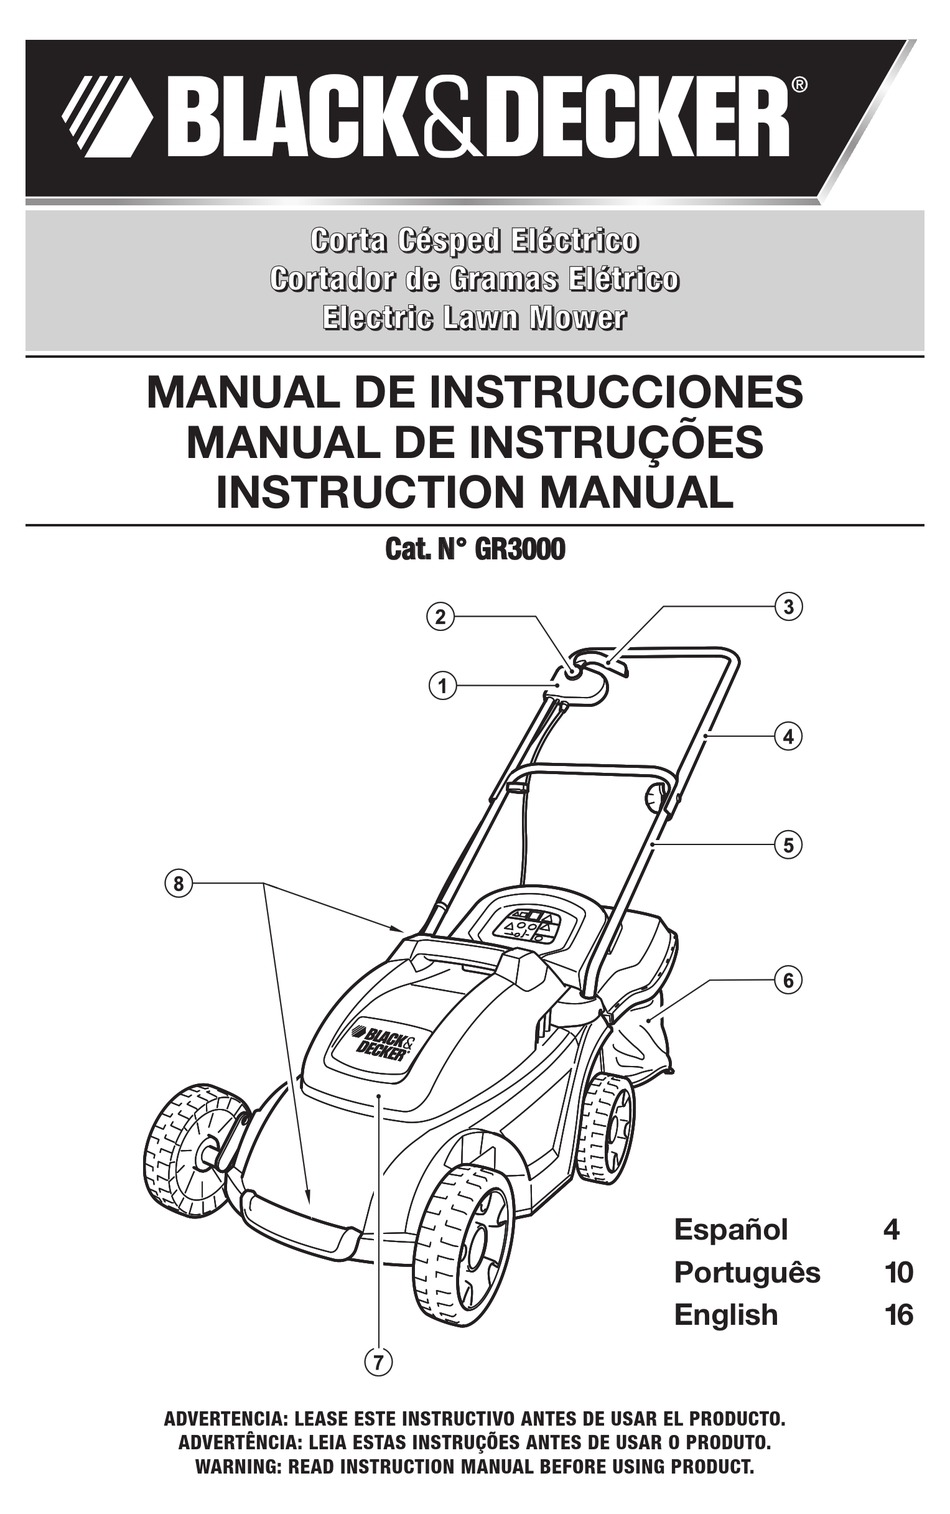 User manual Black & Decker GR3400 (English - 16 pages)